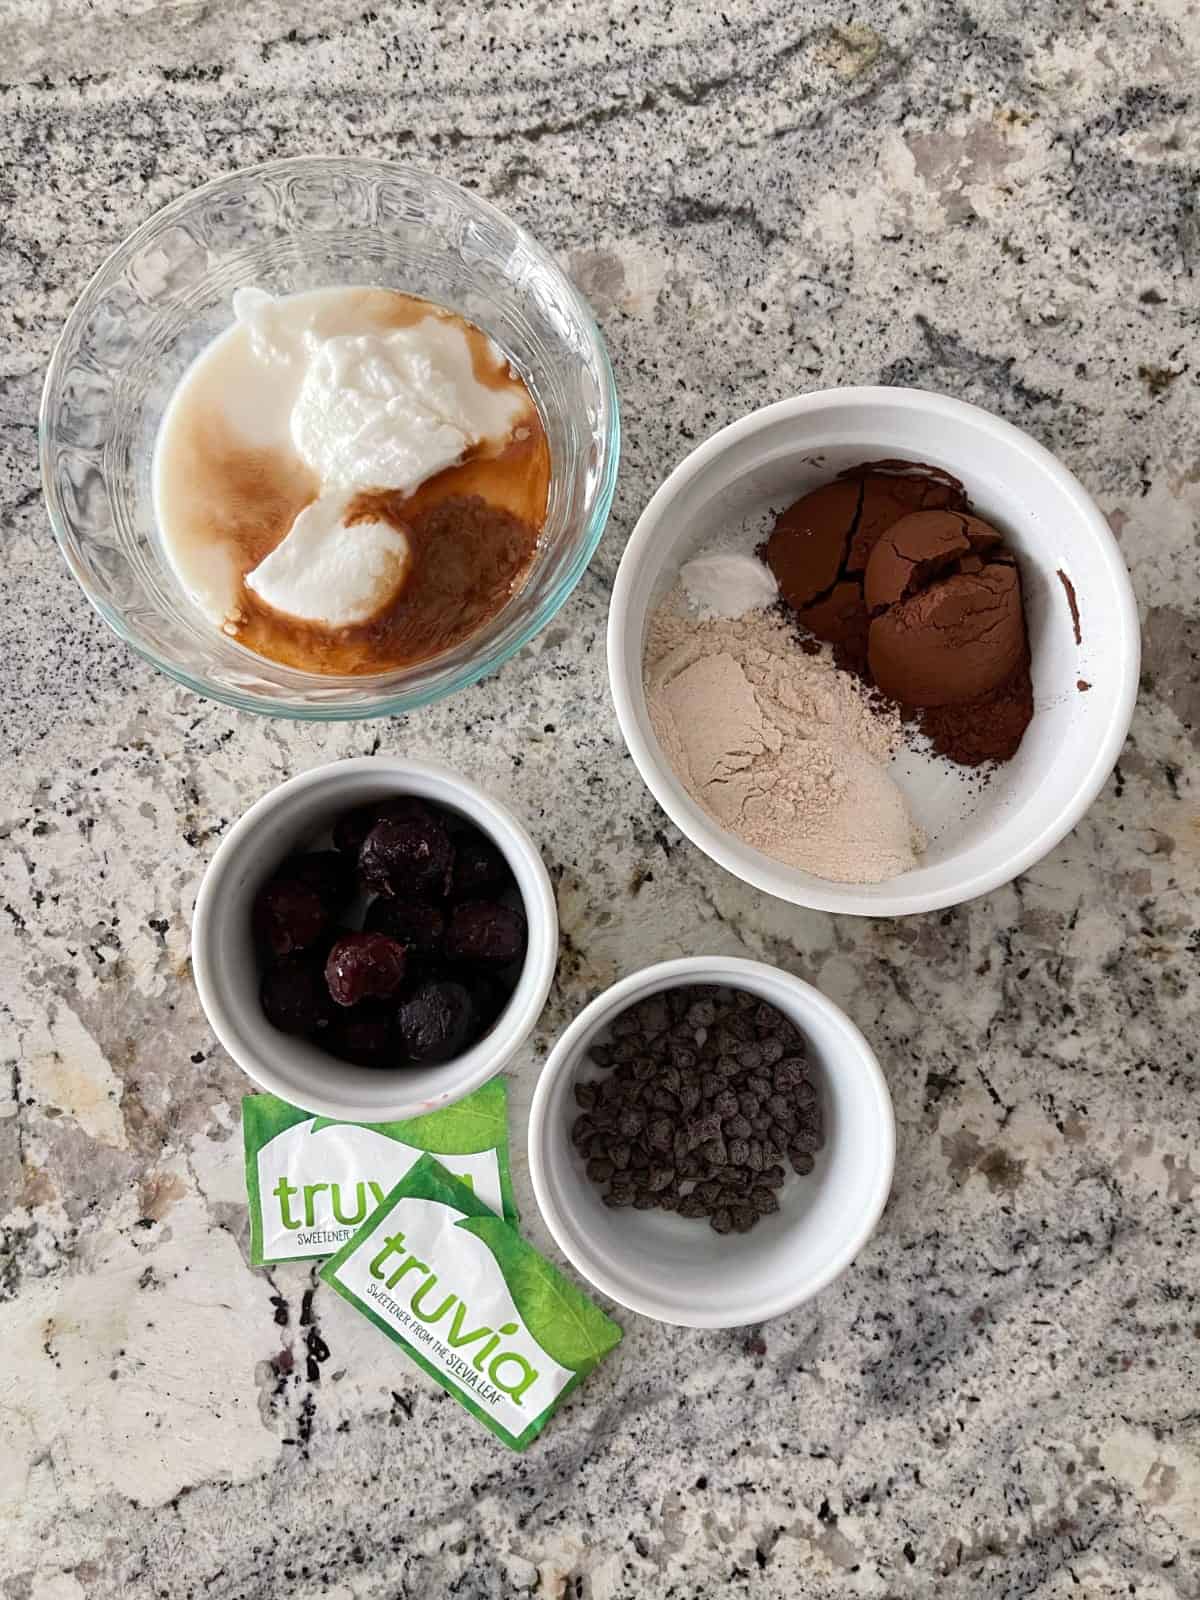 Ingredients including Truvia stevia packets, frozen cherries, chocolate chips, flour, cocoa powder, Greek yogurt, vanilla and almond milk in small bowls on granite counter.